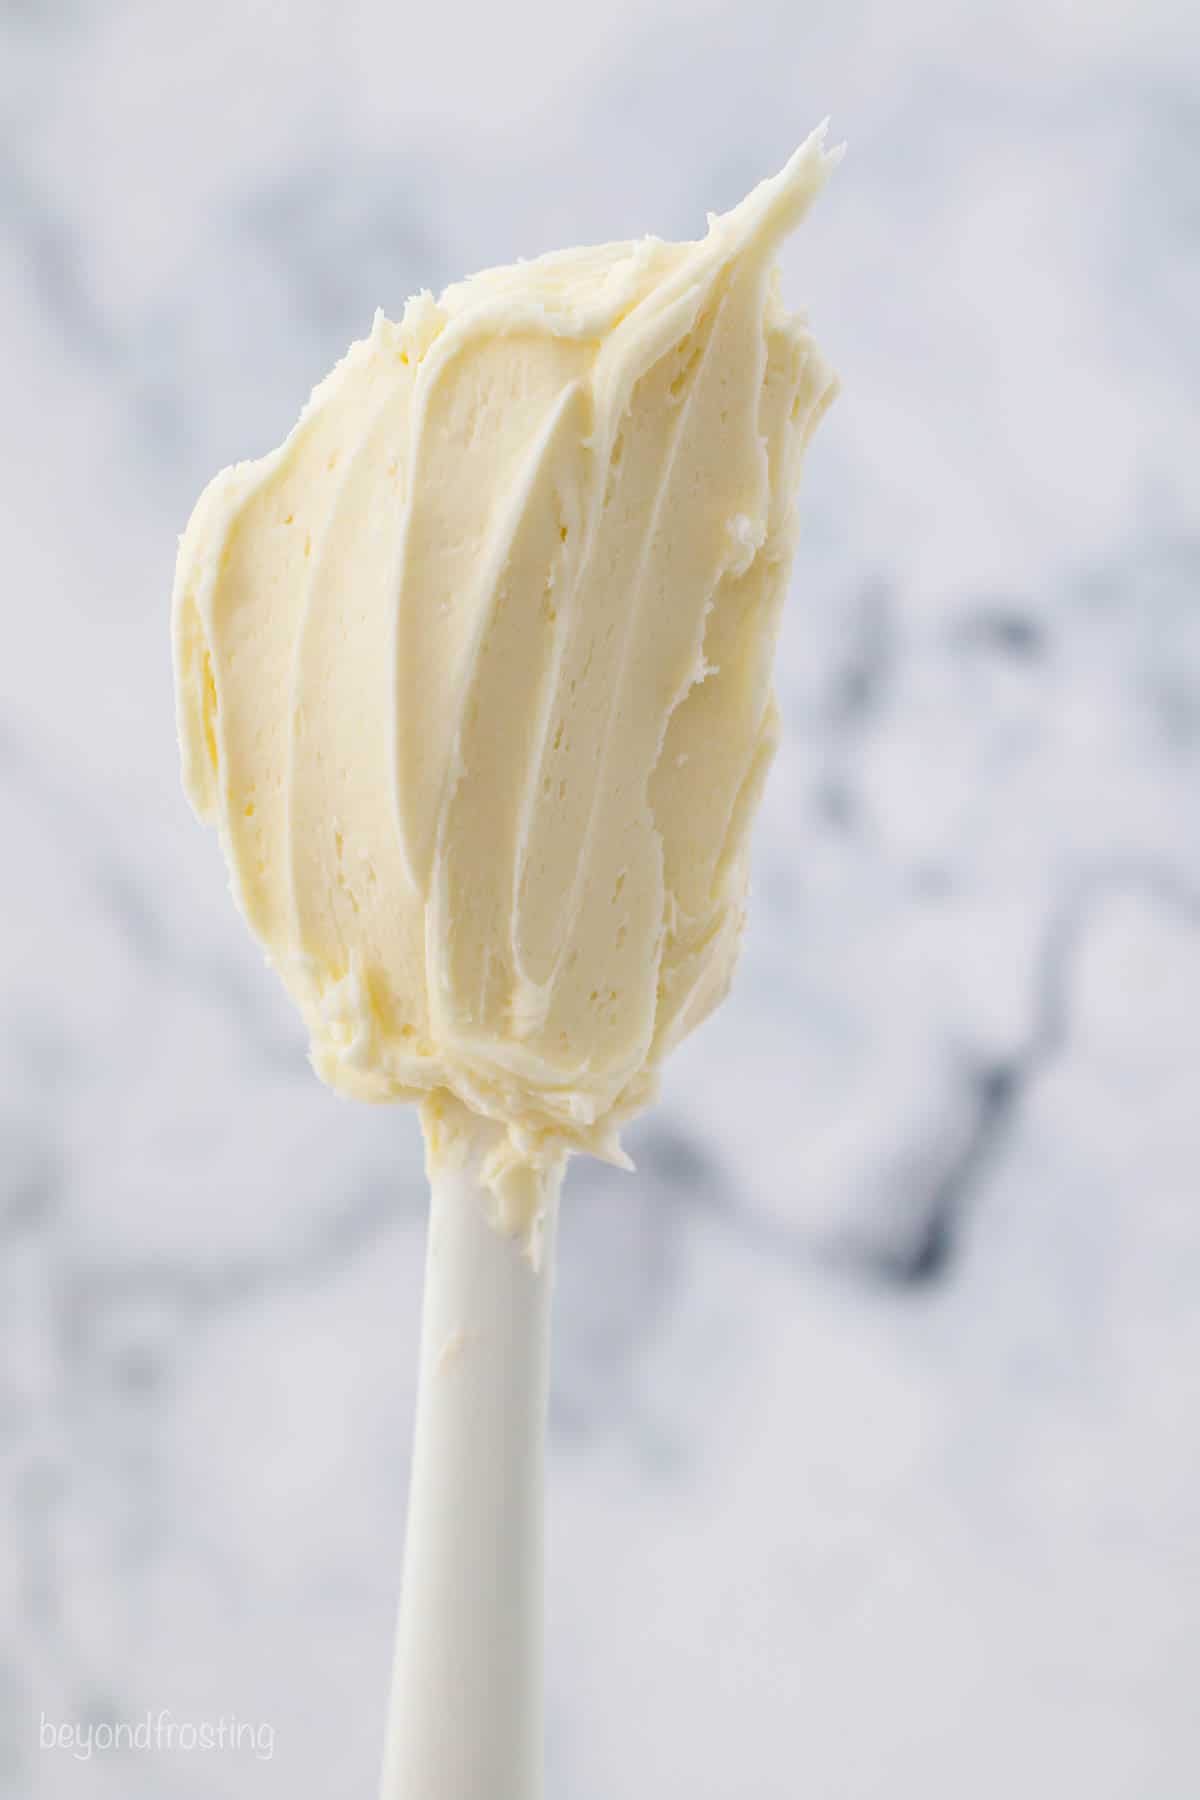 A white spatula with smoothed vanilla buttercream on it.